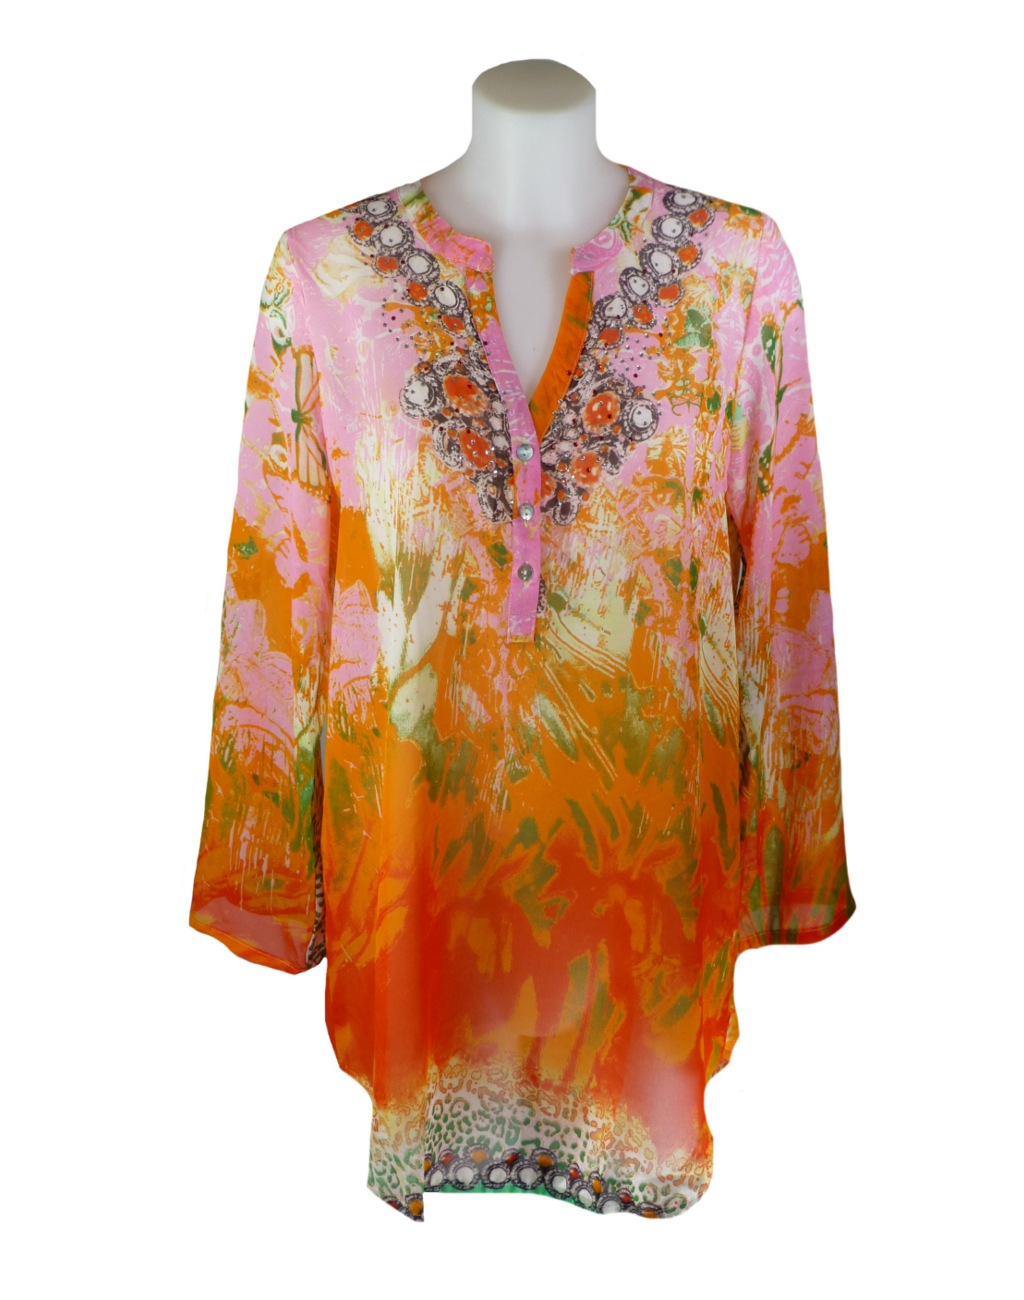 OPL Pink and Orange Top front2 - Fashion Fix Online